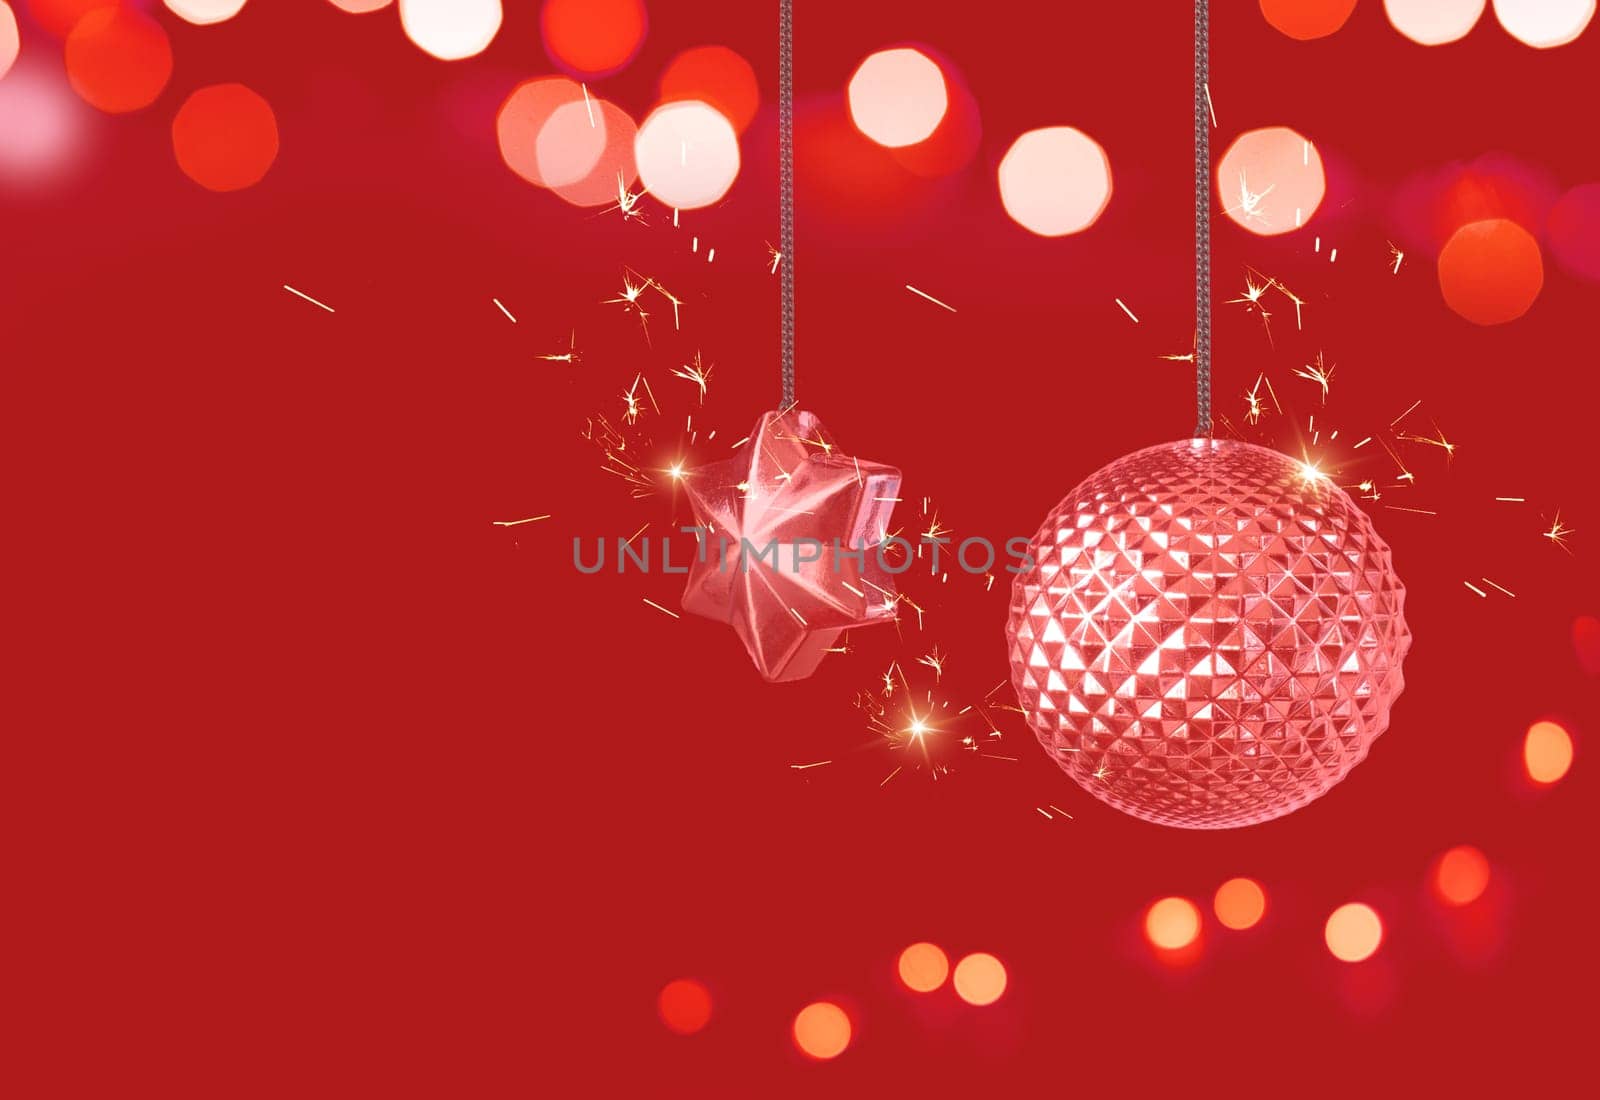 Christmas ball, star and lights on red background. Christmas and new year card. Copy space.